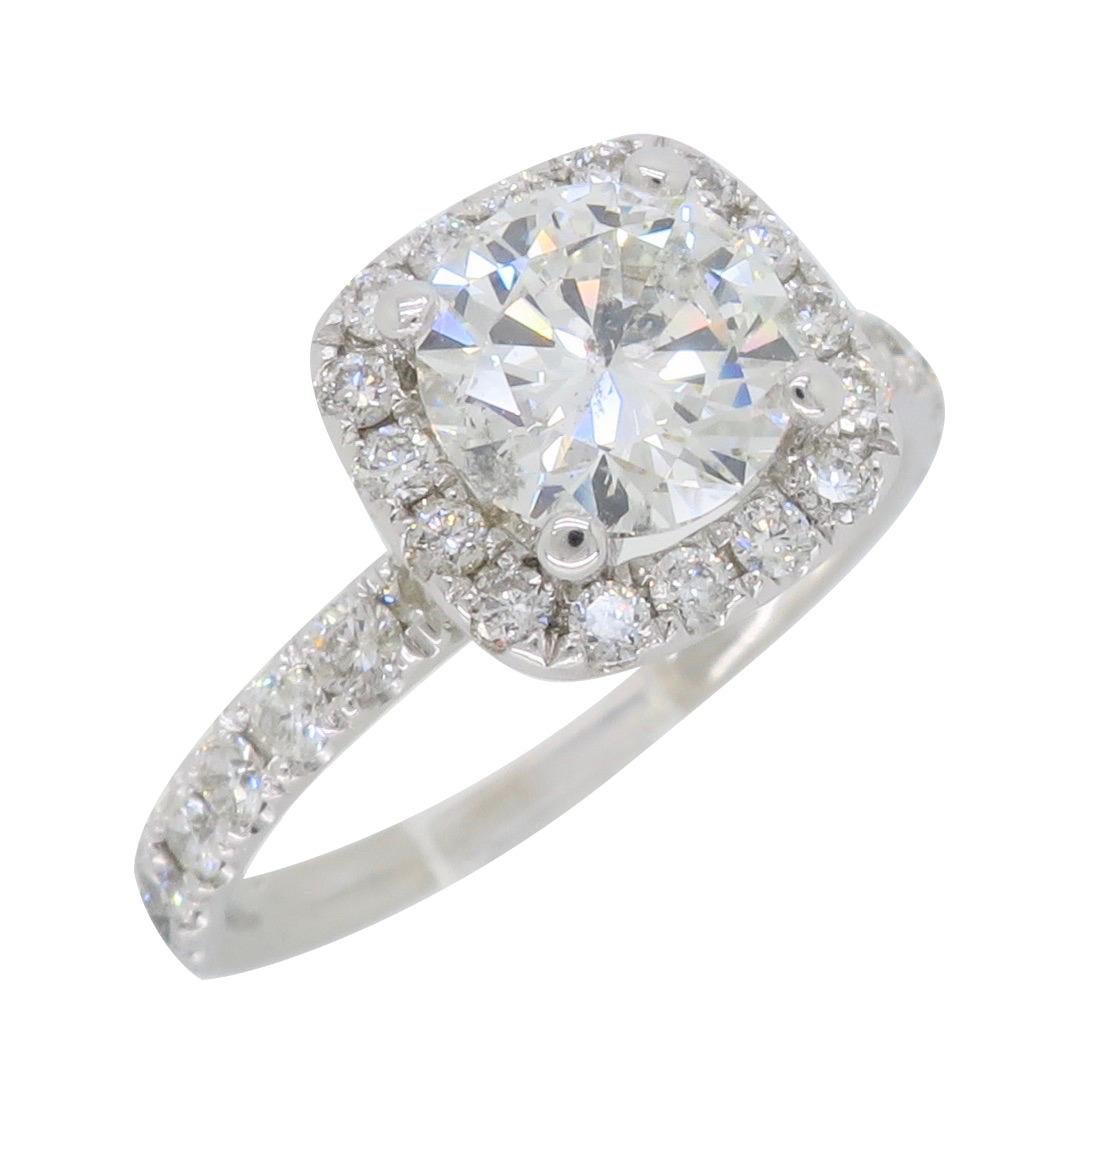 1.61 Carat Diamond Halo Engagement Ring In Excellent Condition For Sale In Webster, NY